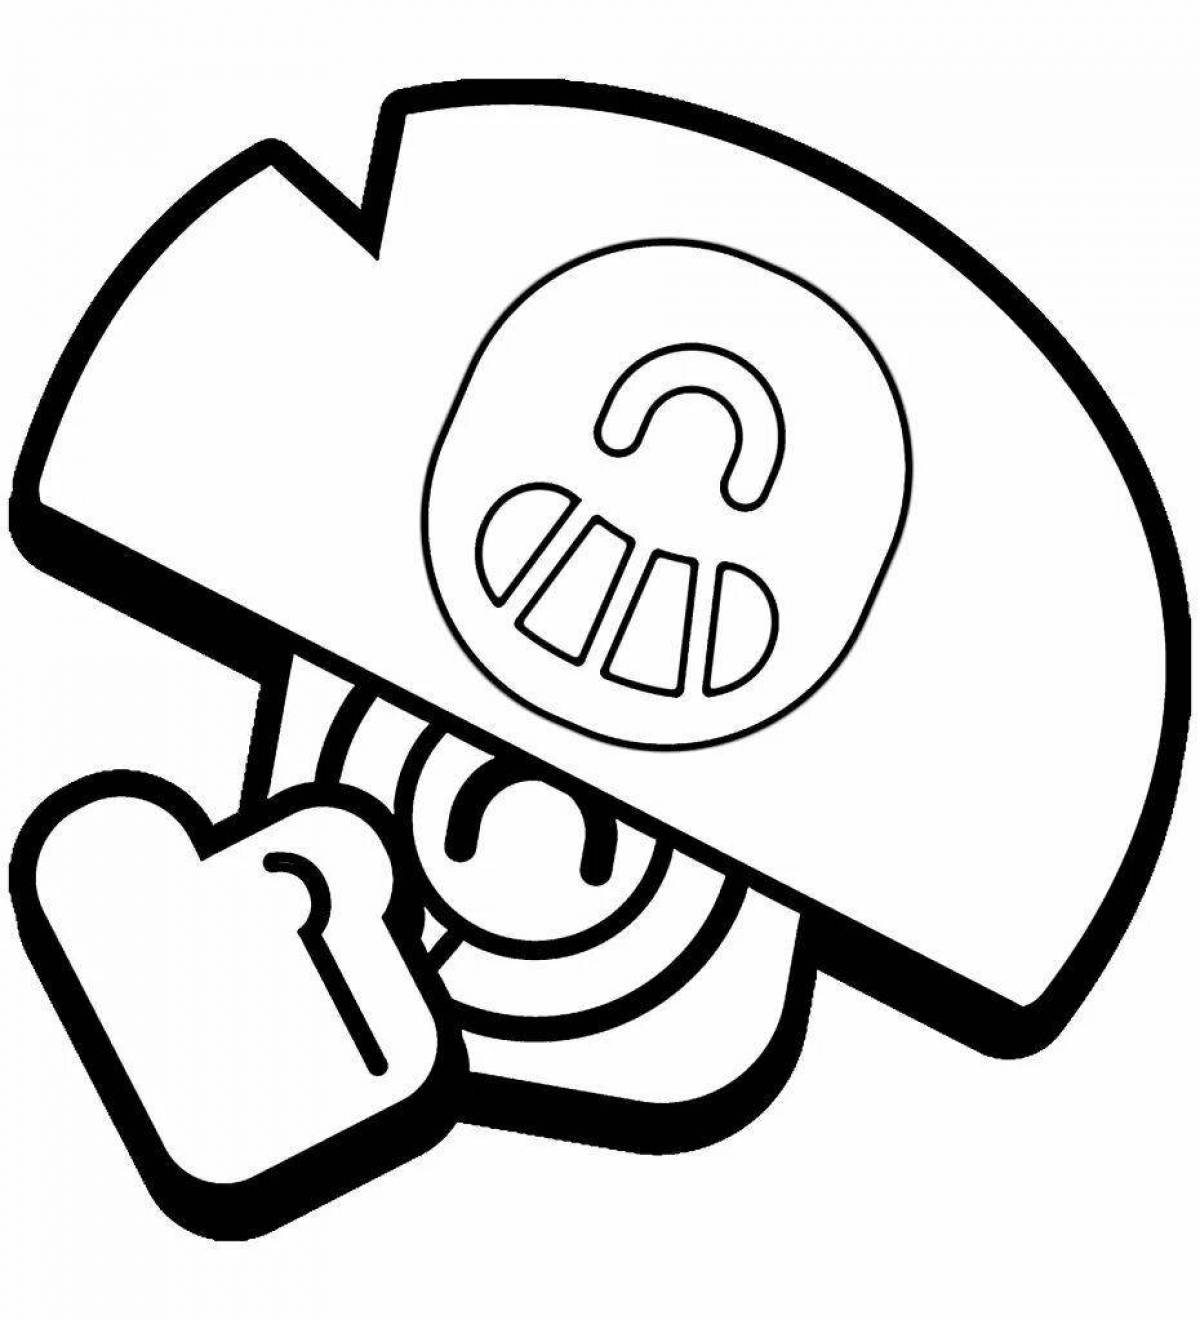 Joyful coloring page icons from brawl stars